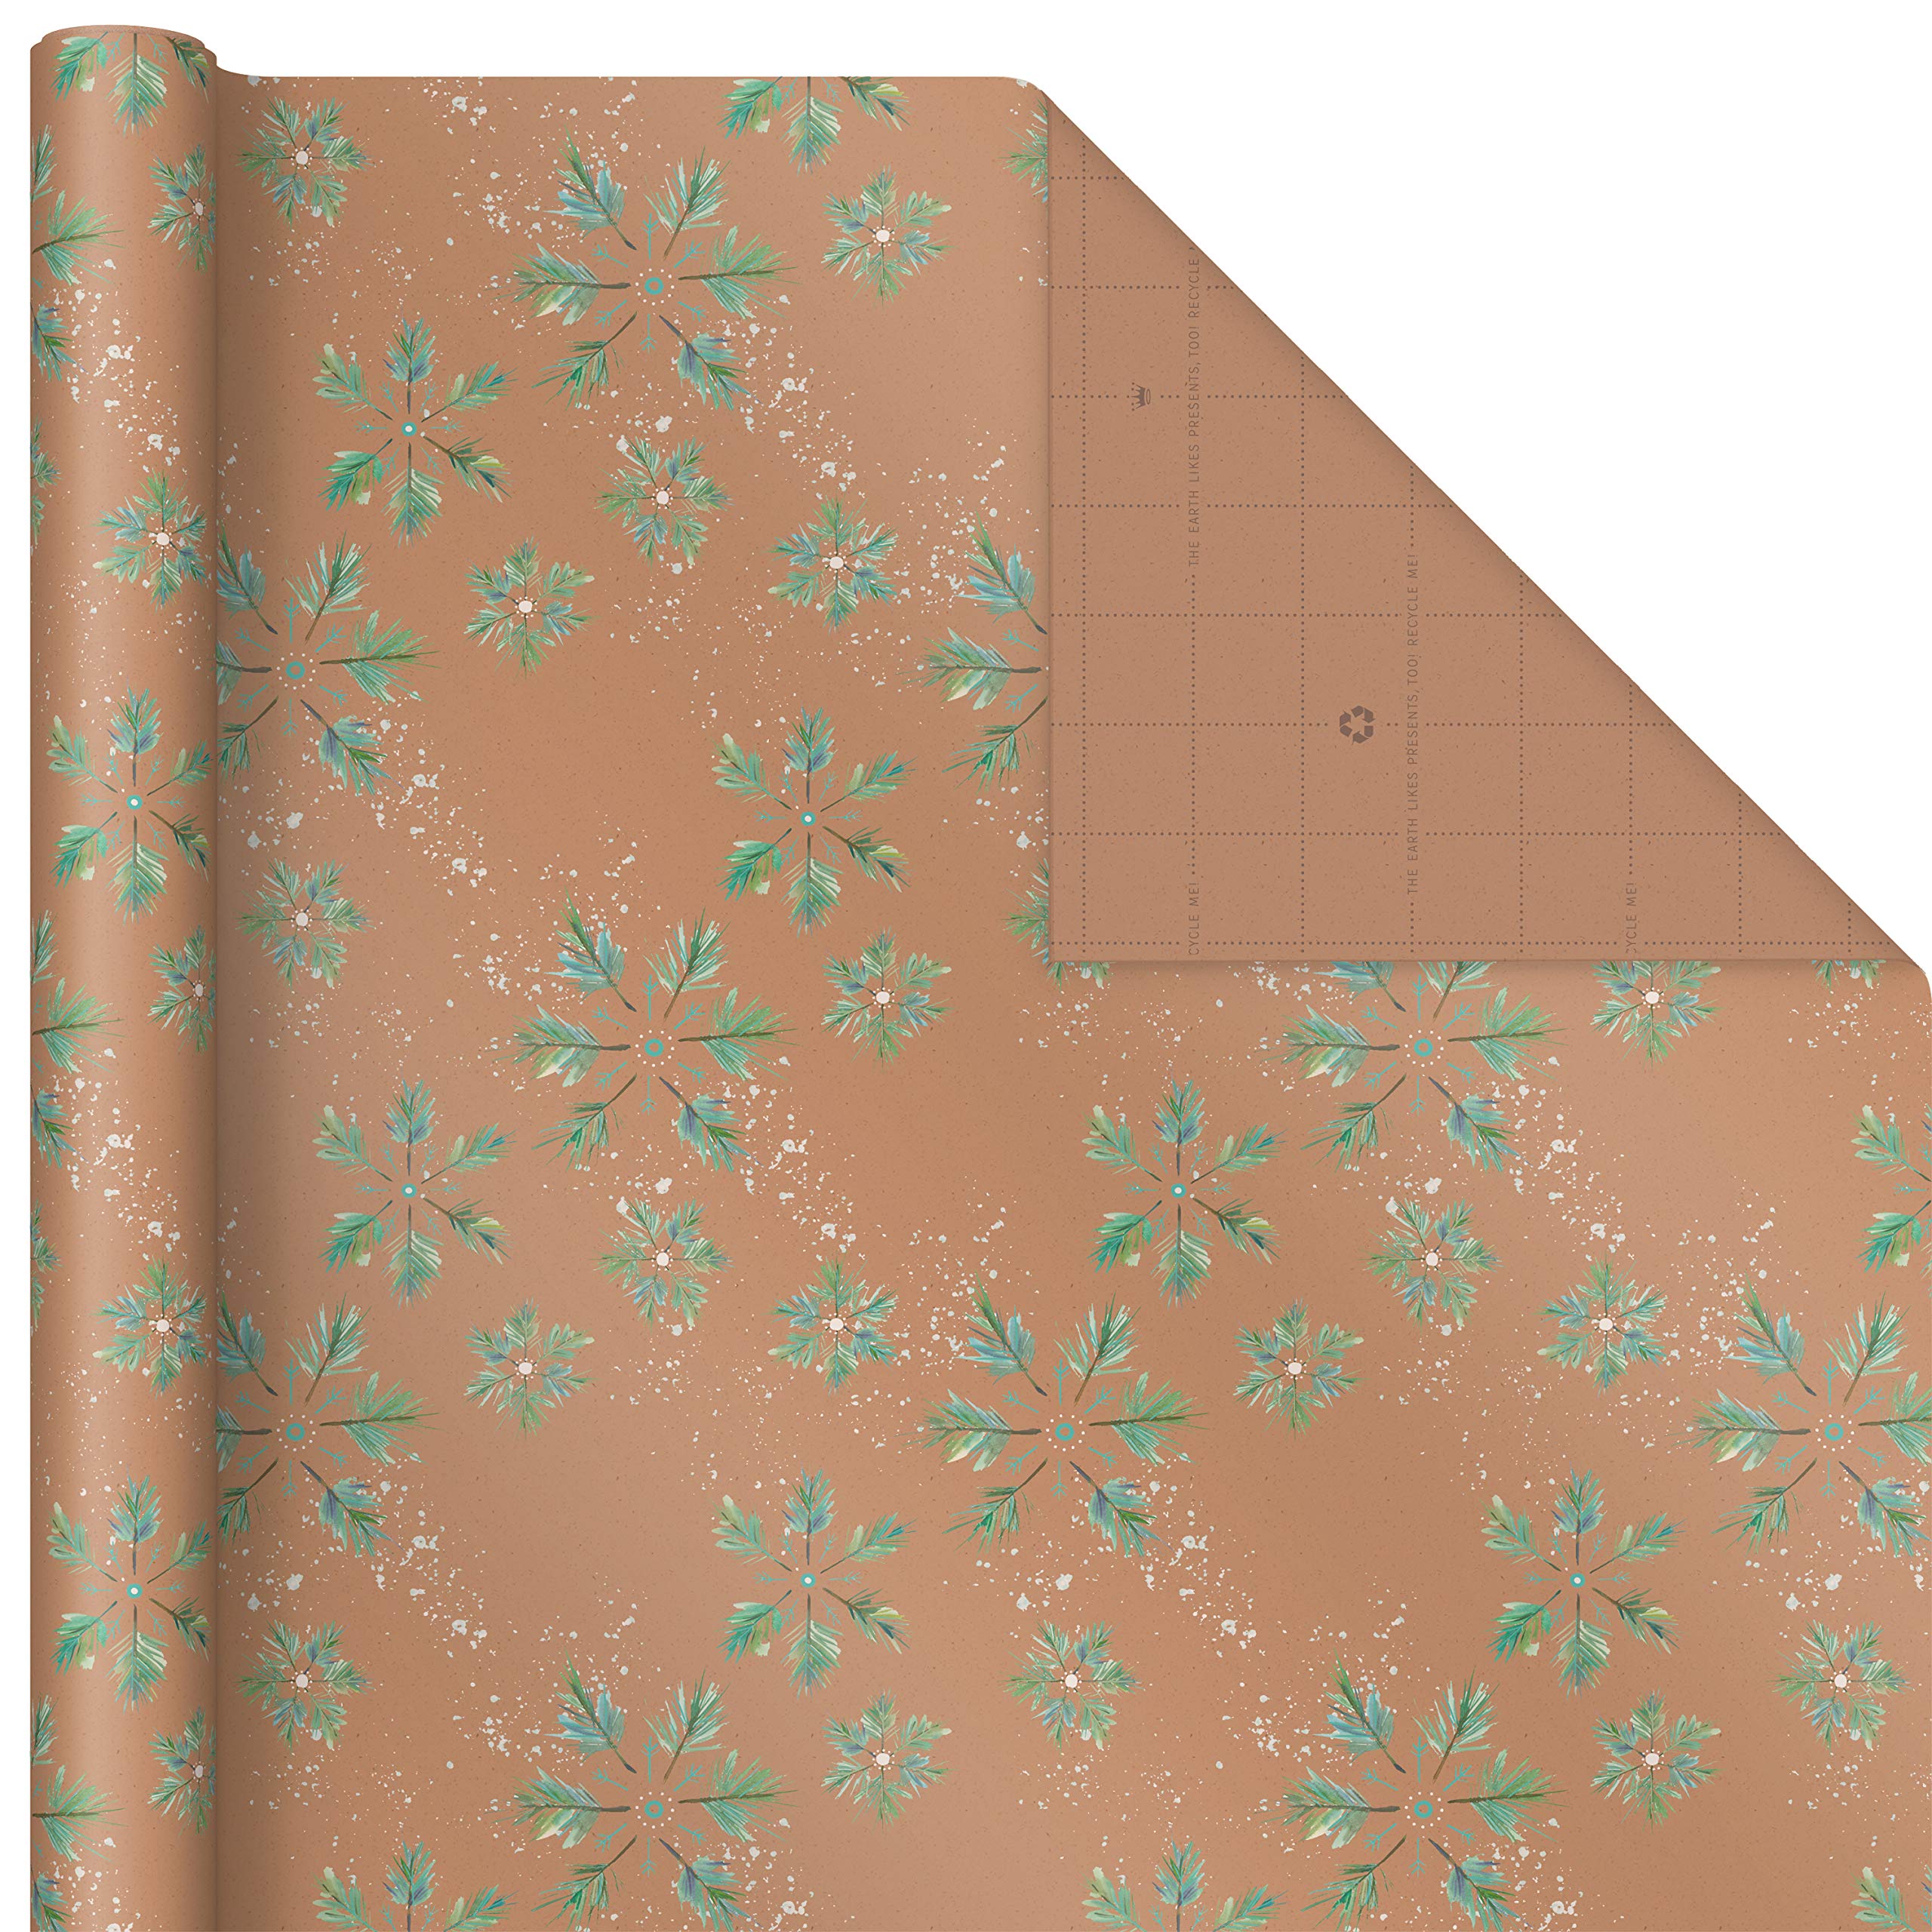 Hallmark Holiday Sustainable Kraft Tri-Pack with Cut Lines on Reverse (3 Rolls: 90 sq. ft. ttl) Wintry Nature: White Snowflakes, Blue and Green Foliage, Christmas Trees, Sustainable Holiday Wrap (0005JXW1051)